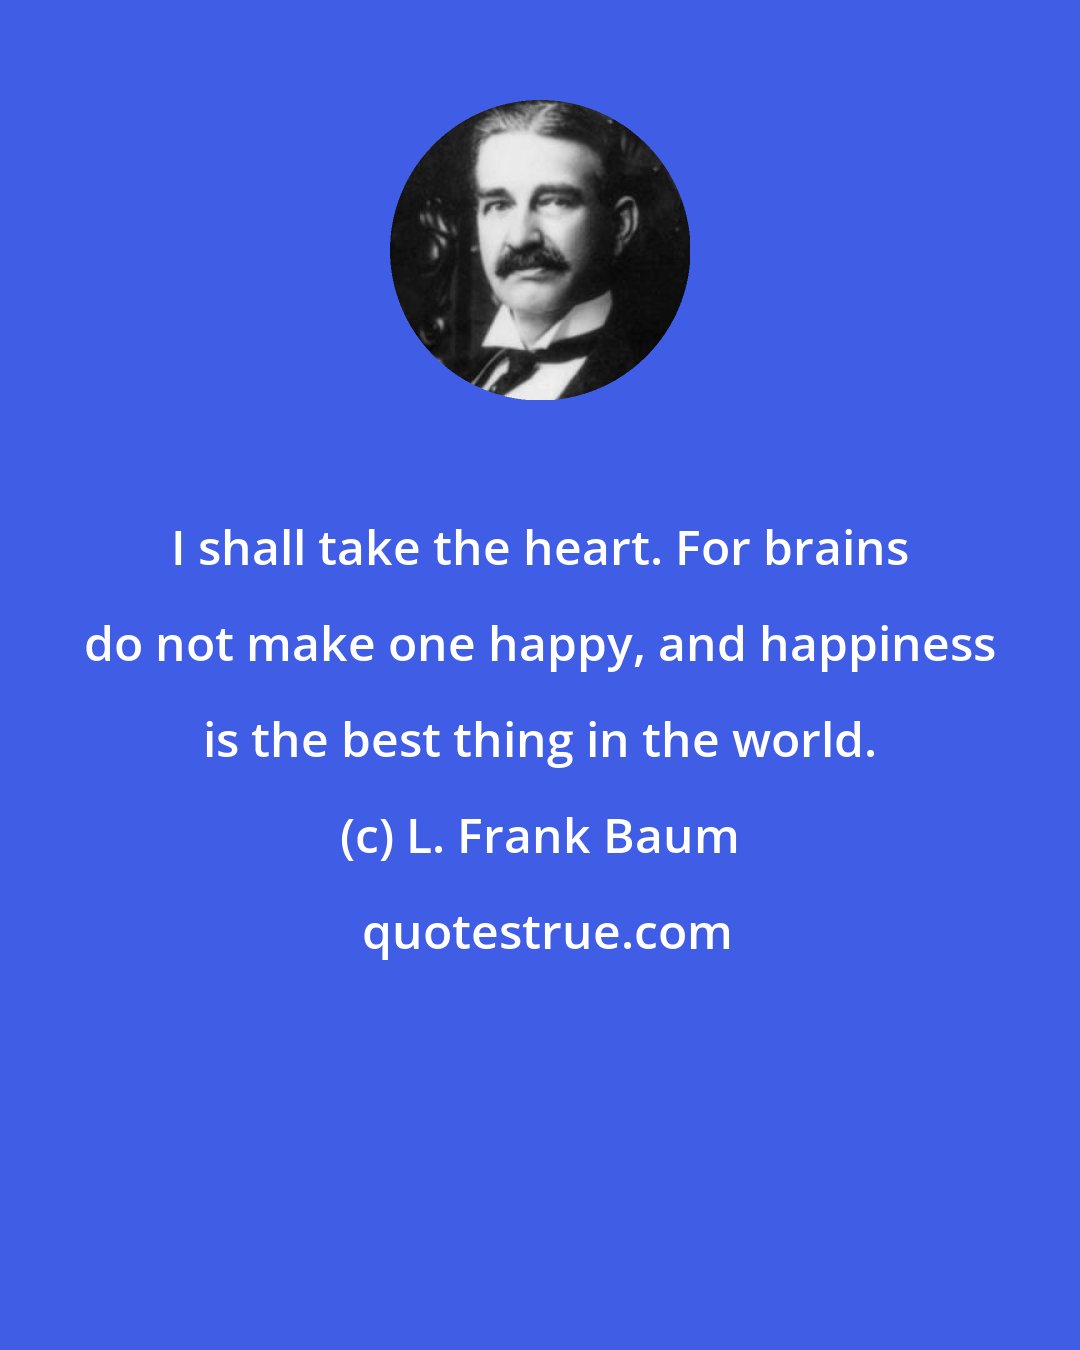 L. Frank Baum: I shall take the heart. For brains do not make one happy, and happiness is the best thing in the world.